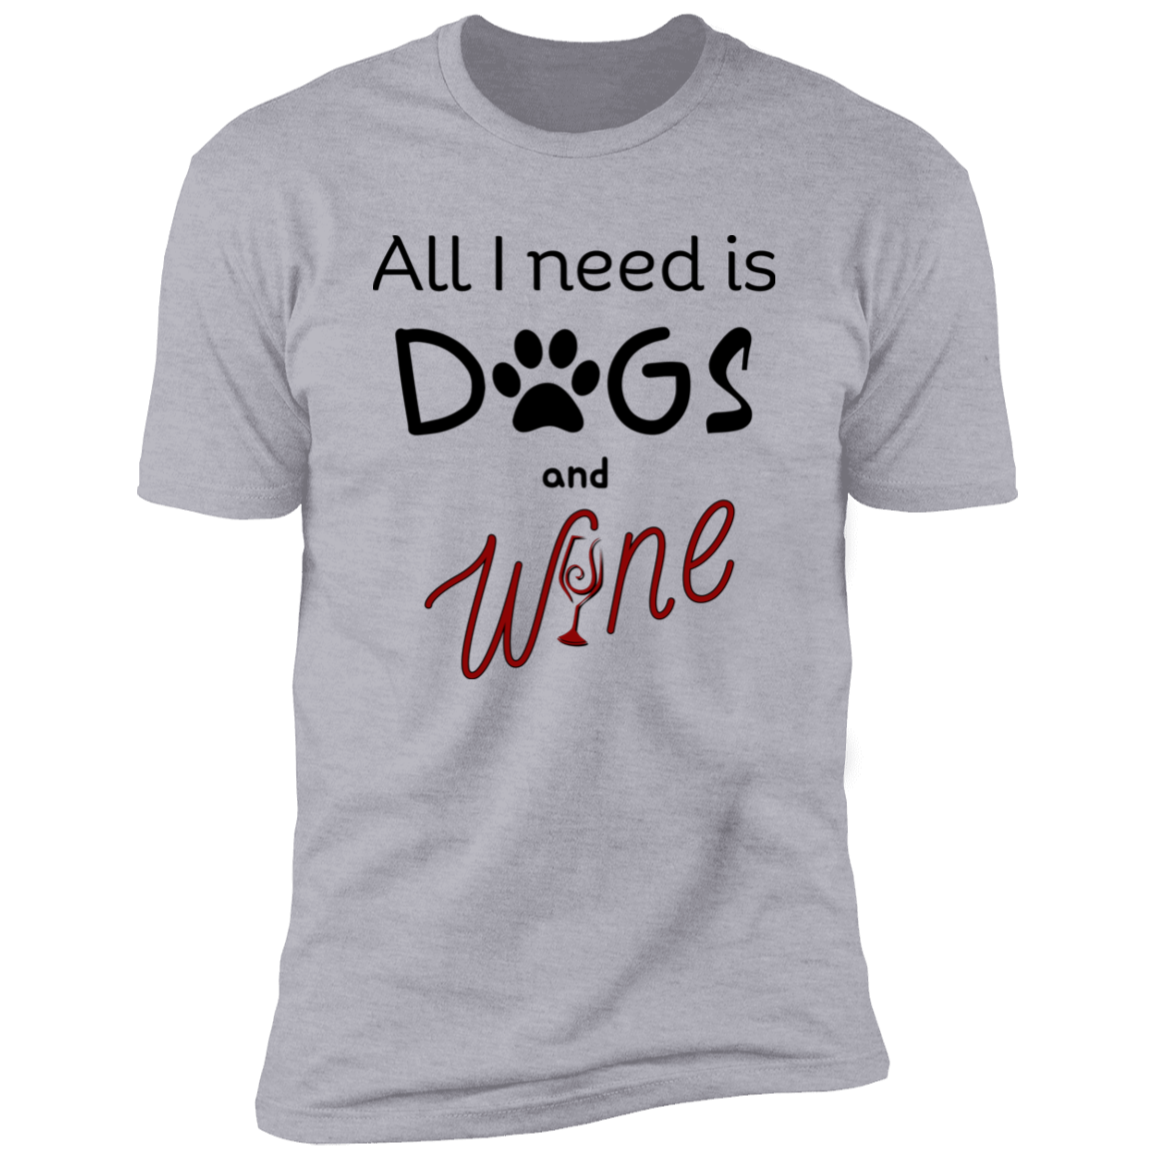 All I Need is Dogs and Wine T-shirt, Dog Shirt for humans, in light heather gray